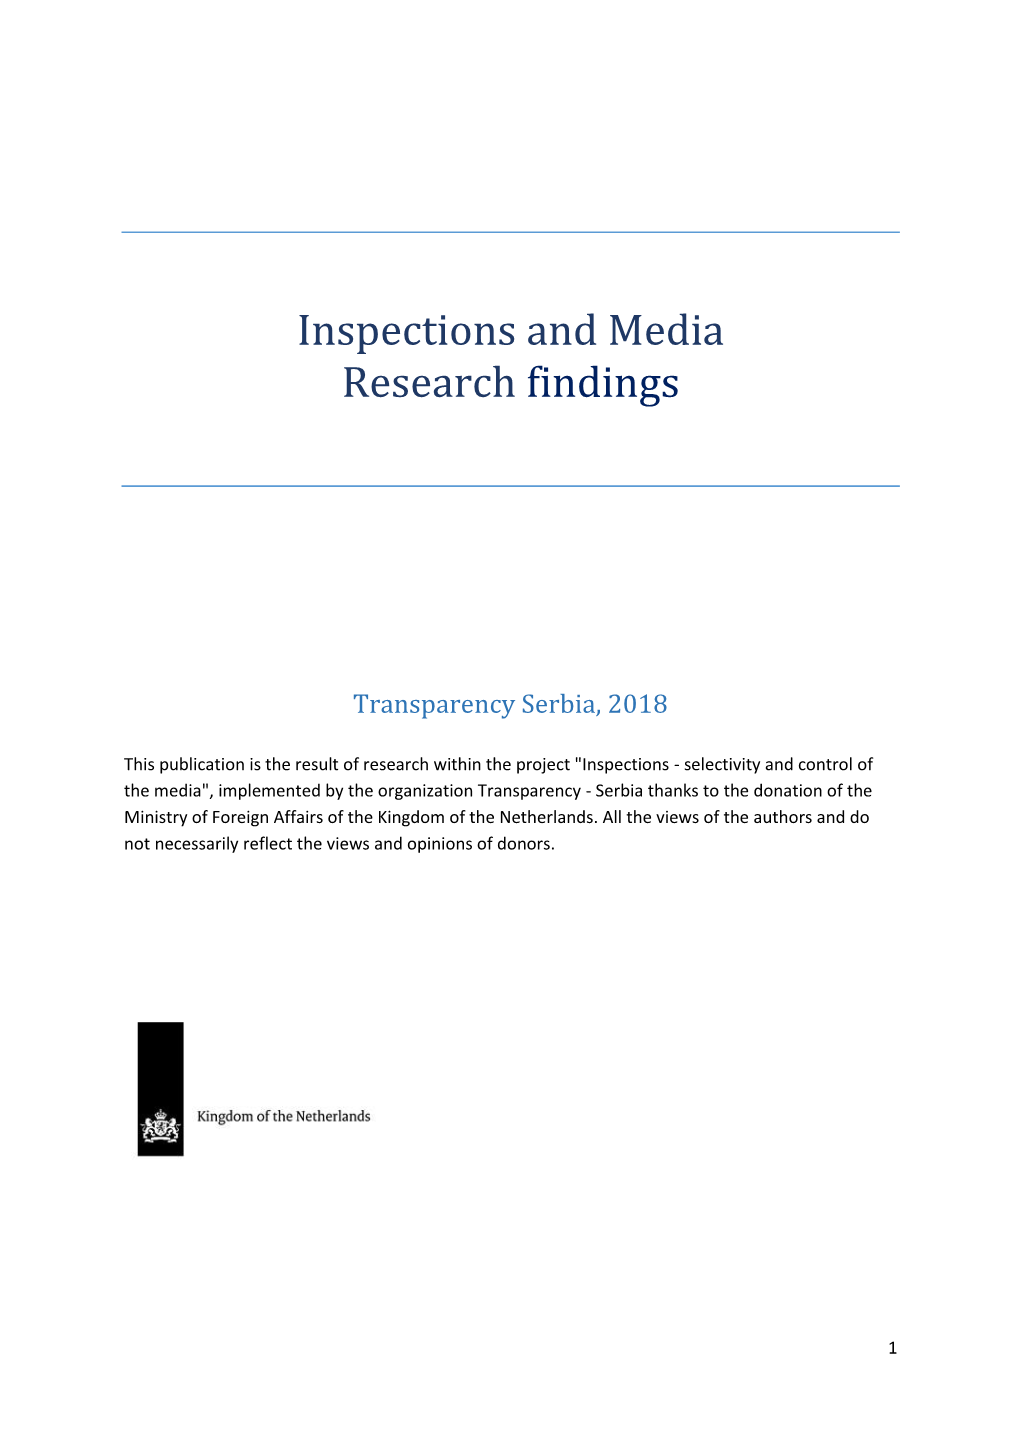 Inspections and Media Research Findings